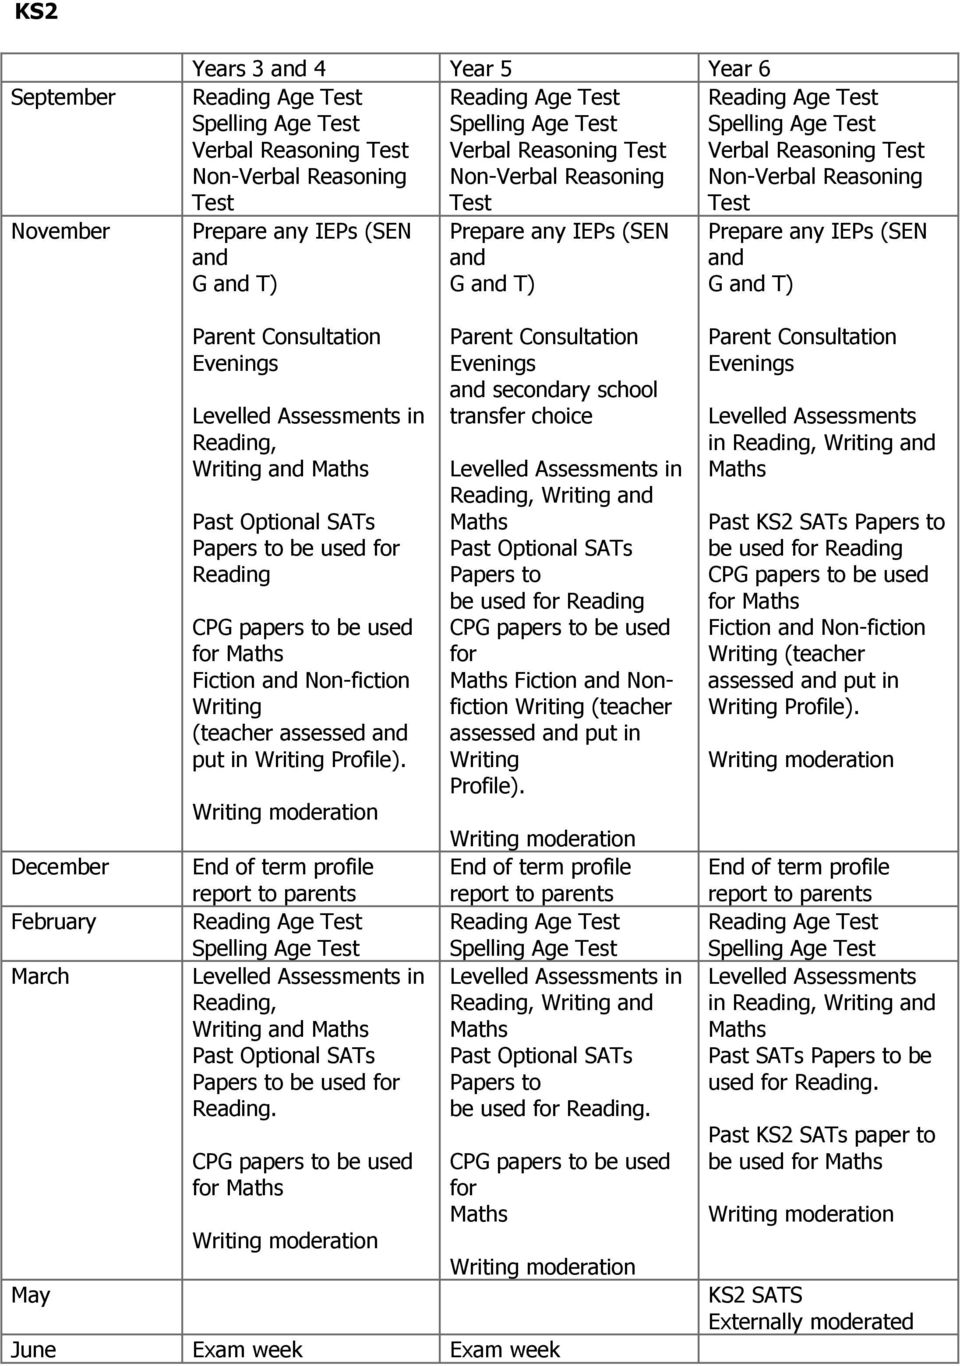 for and secondary school transfer choice in Reading, and Papers to be used for Reading for (teacher assessed and put in in Reading, and Papers to be used for Reading.